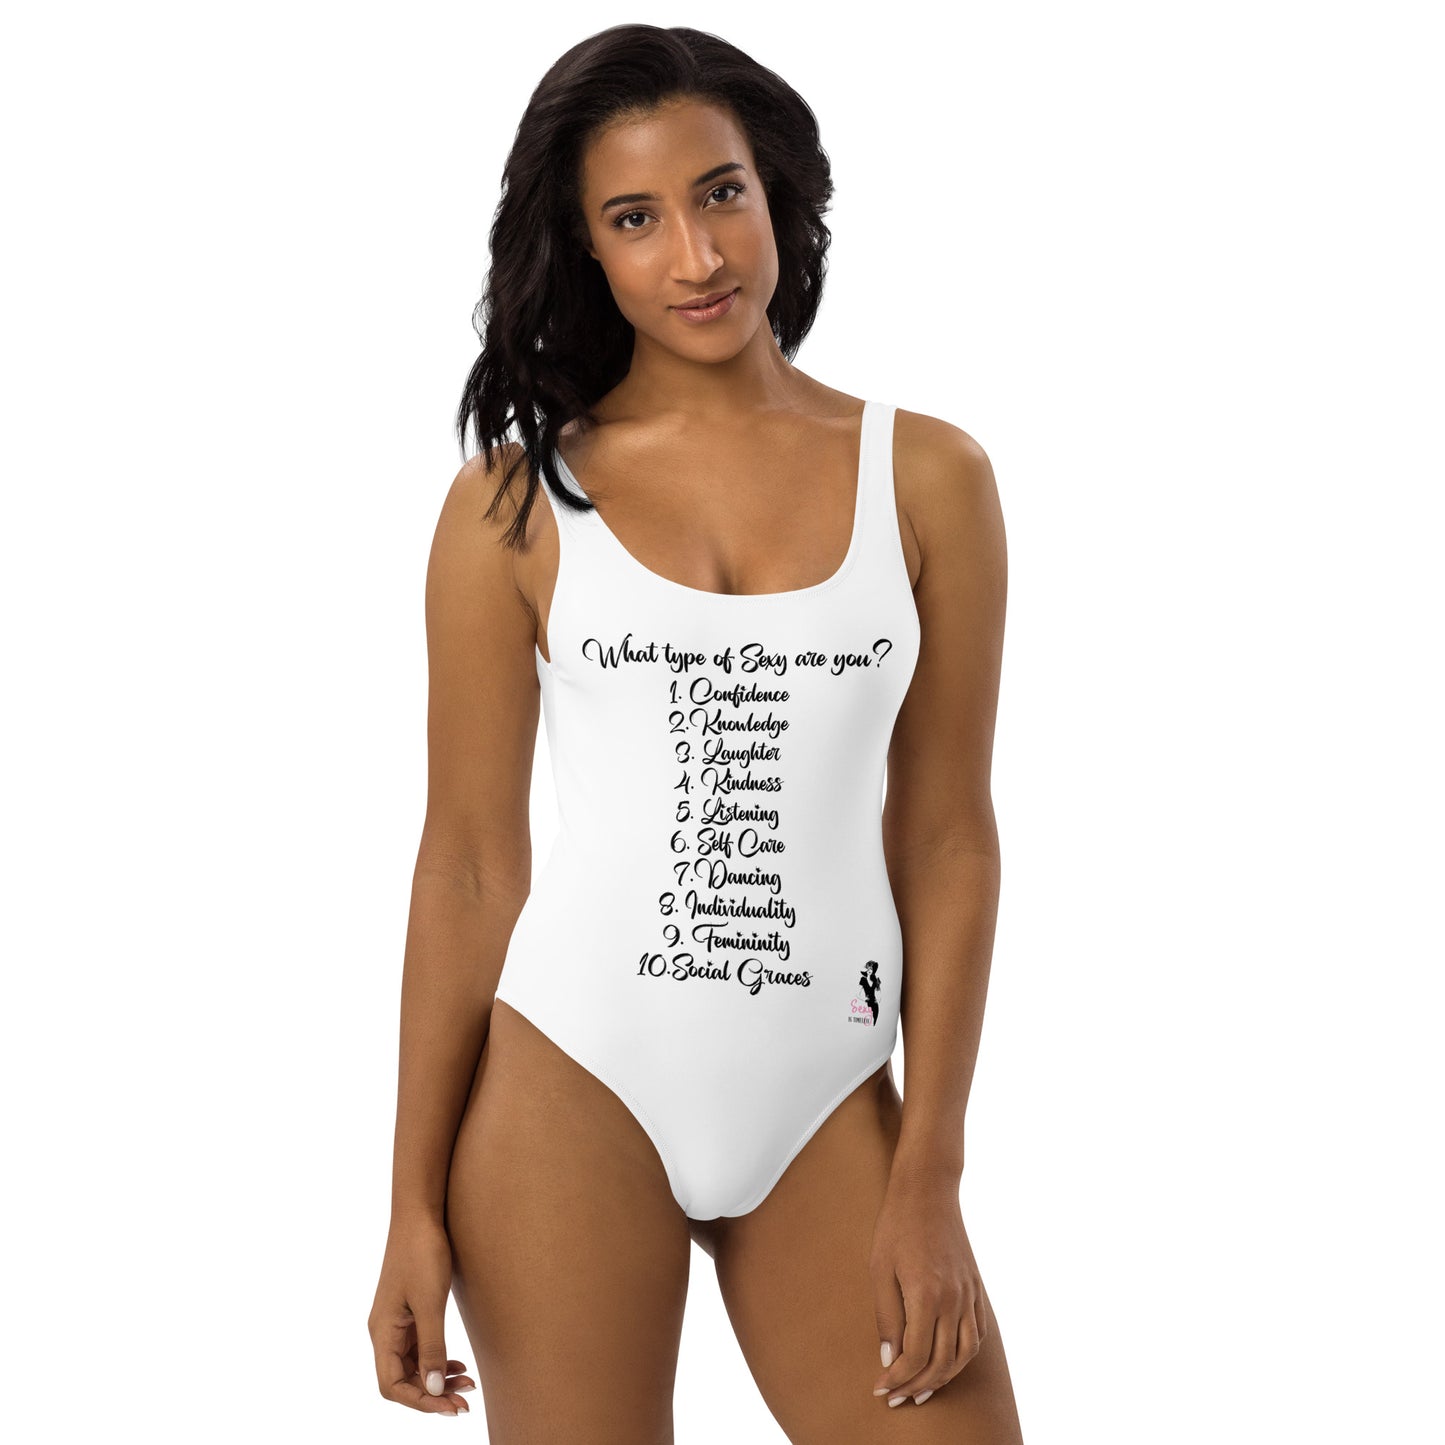 One-Piece Swimsuit - What type of sexy are you?